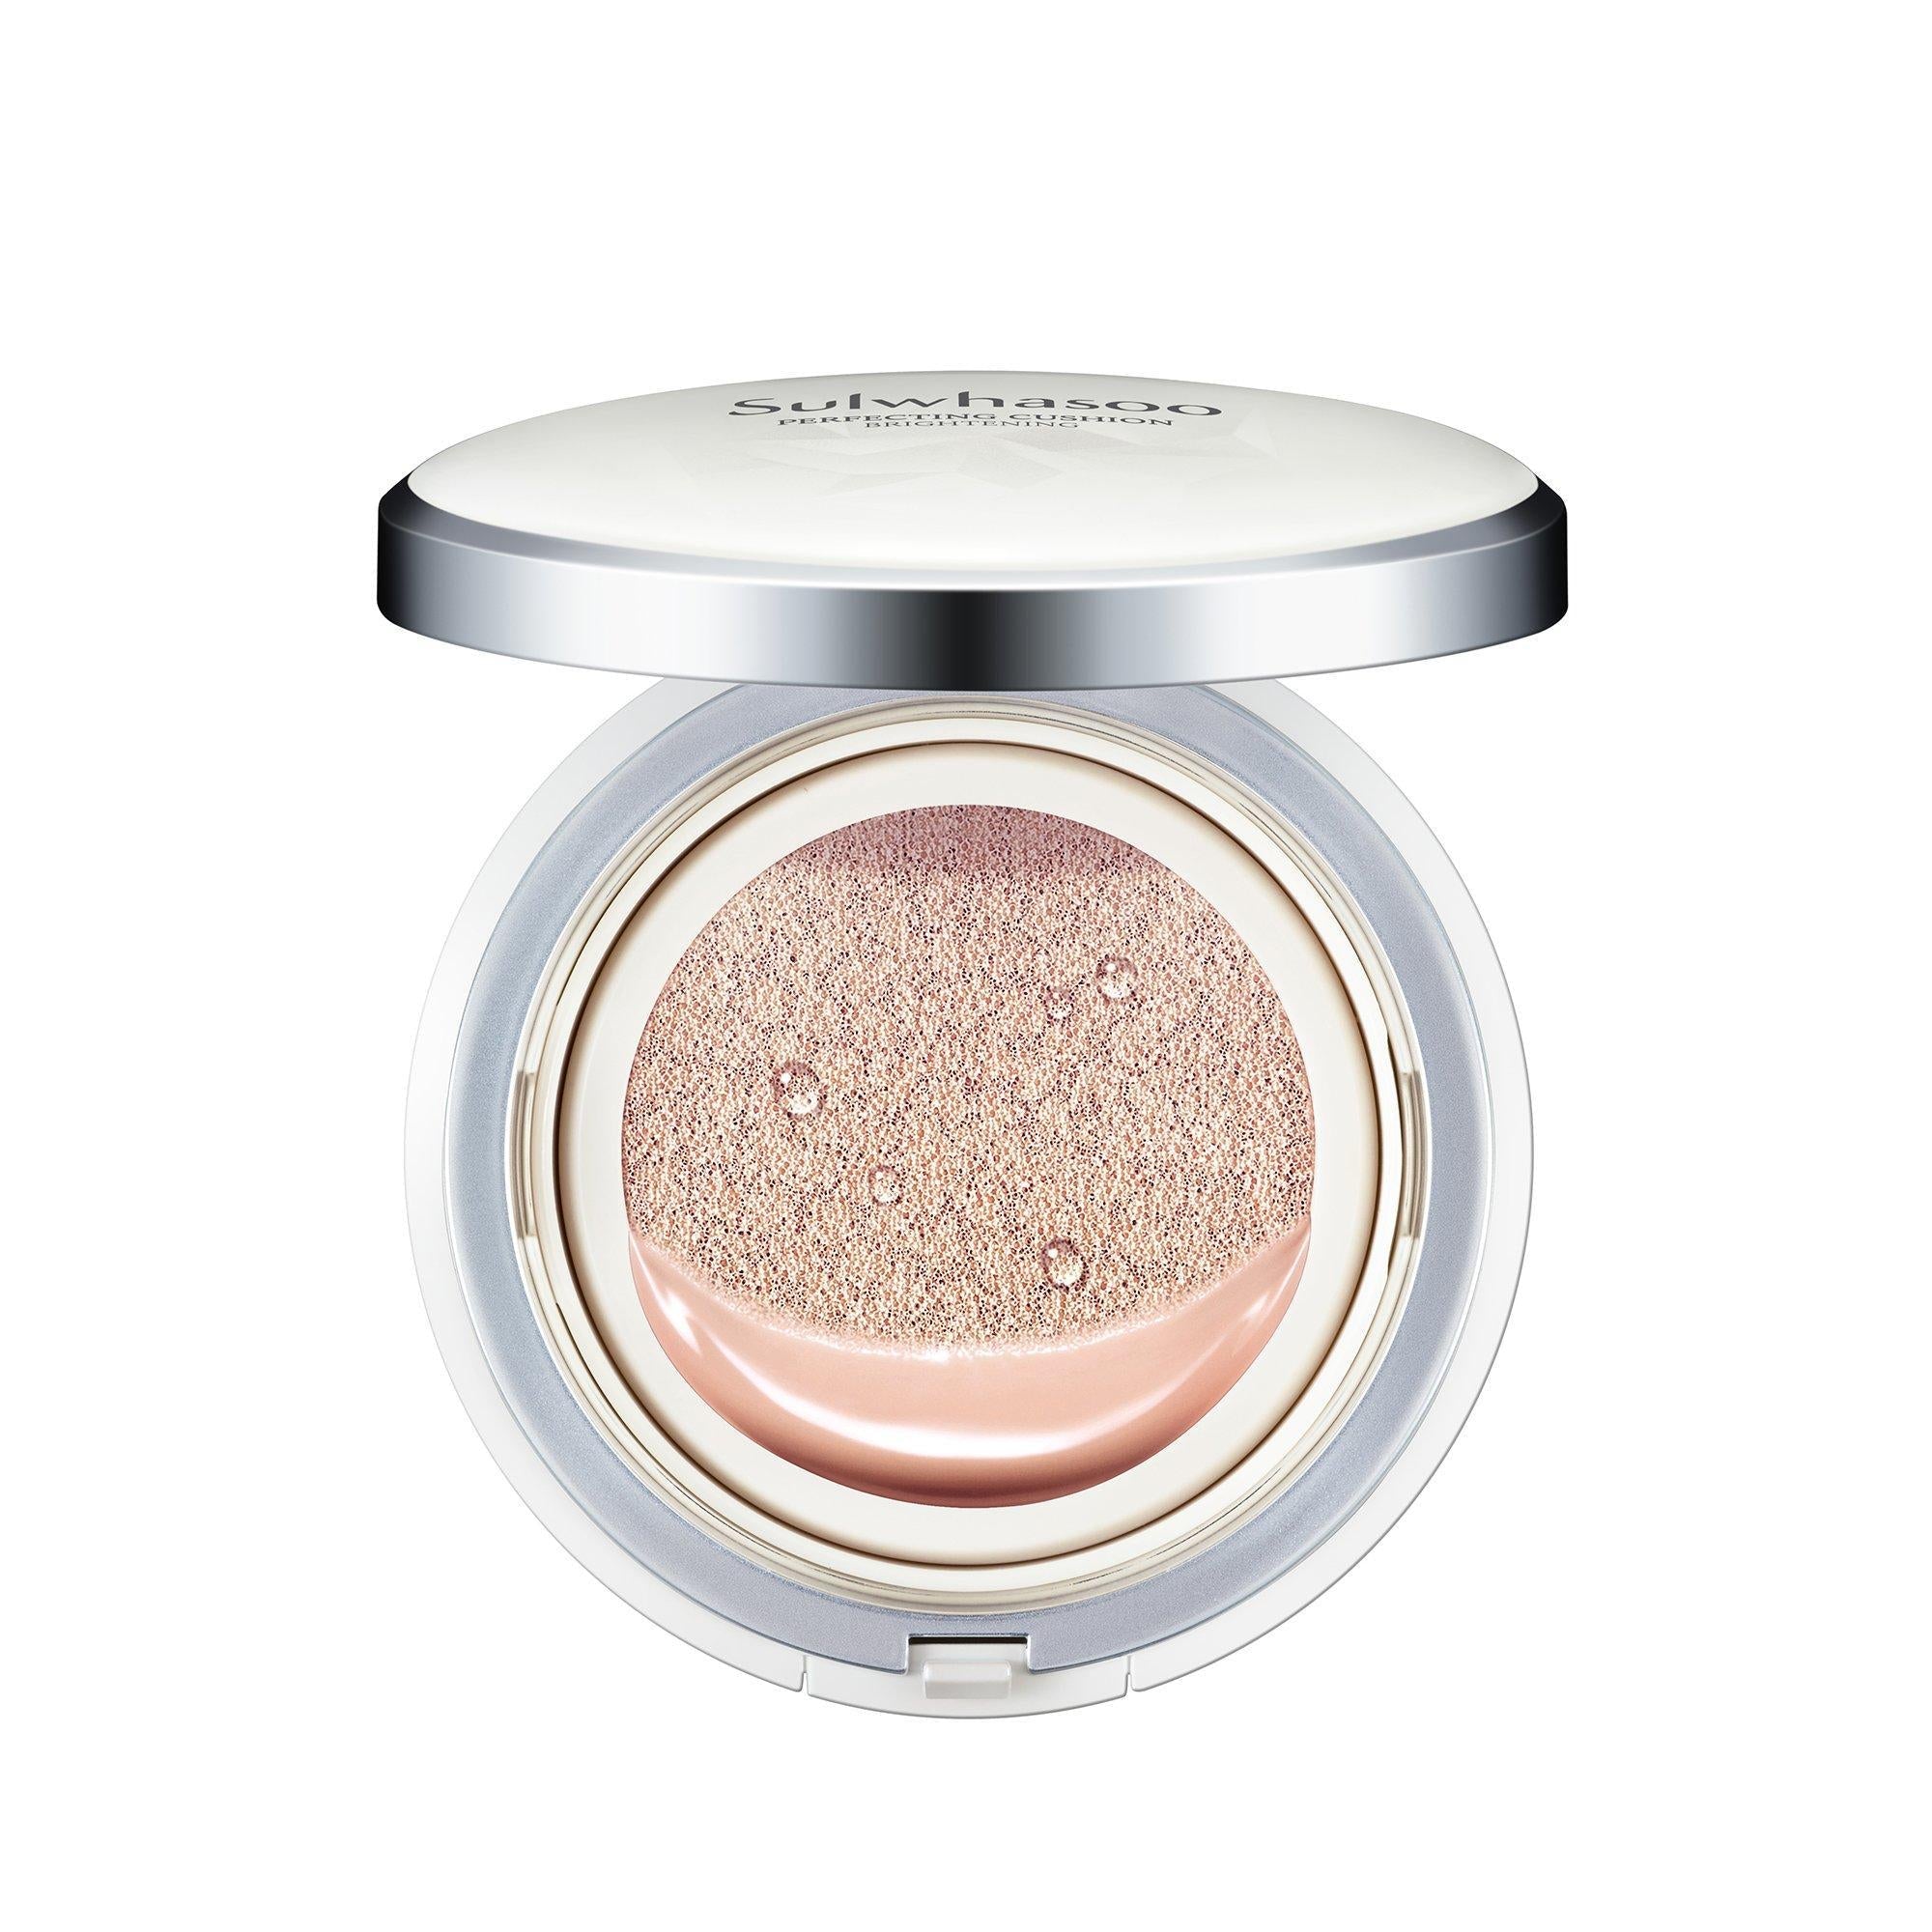 [Sulwhasoo] Snowise Brightening Cushion - 17 Ivory Beige 14g x 2ea-Luxiface.com